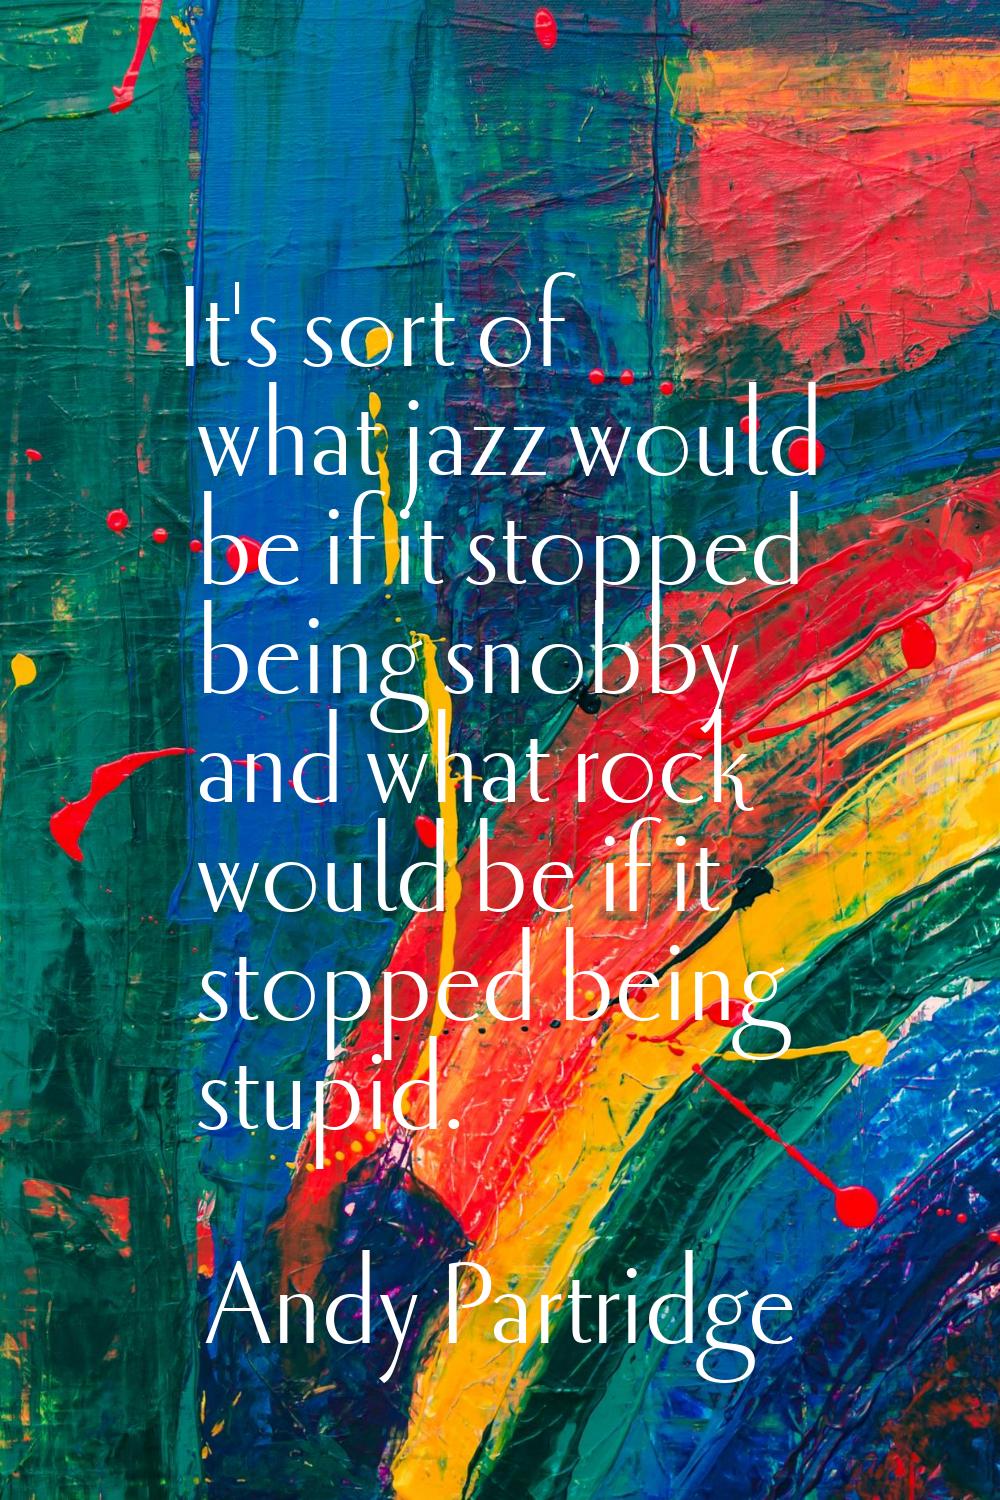 It's sort of what jazz would be if it stopped being snobby and what rock would be if it stopped bei